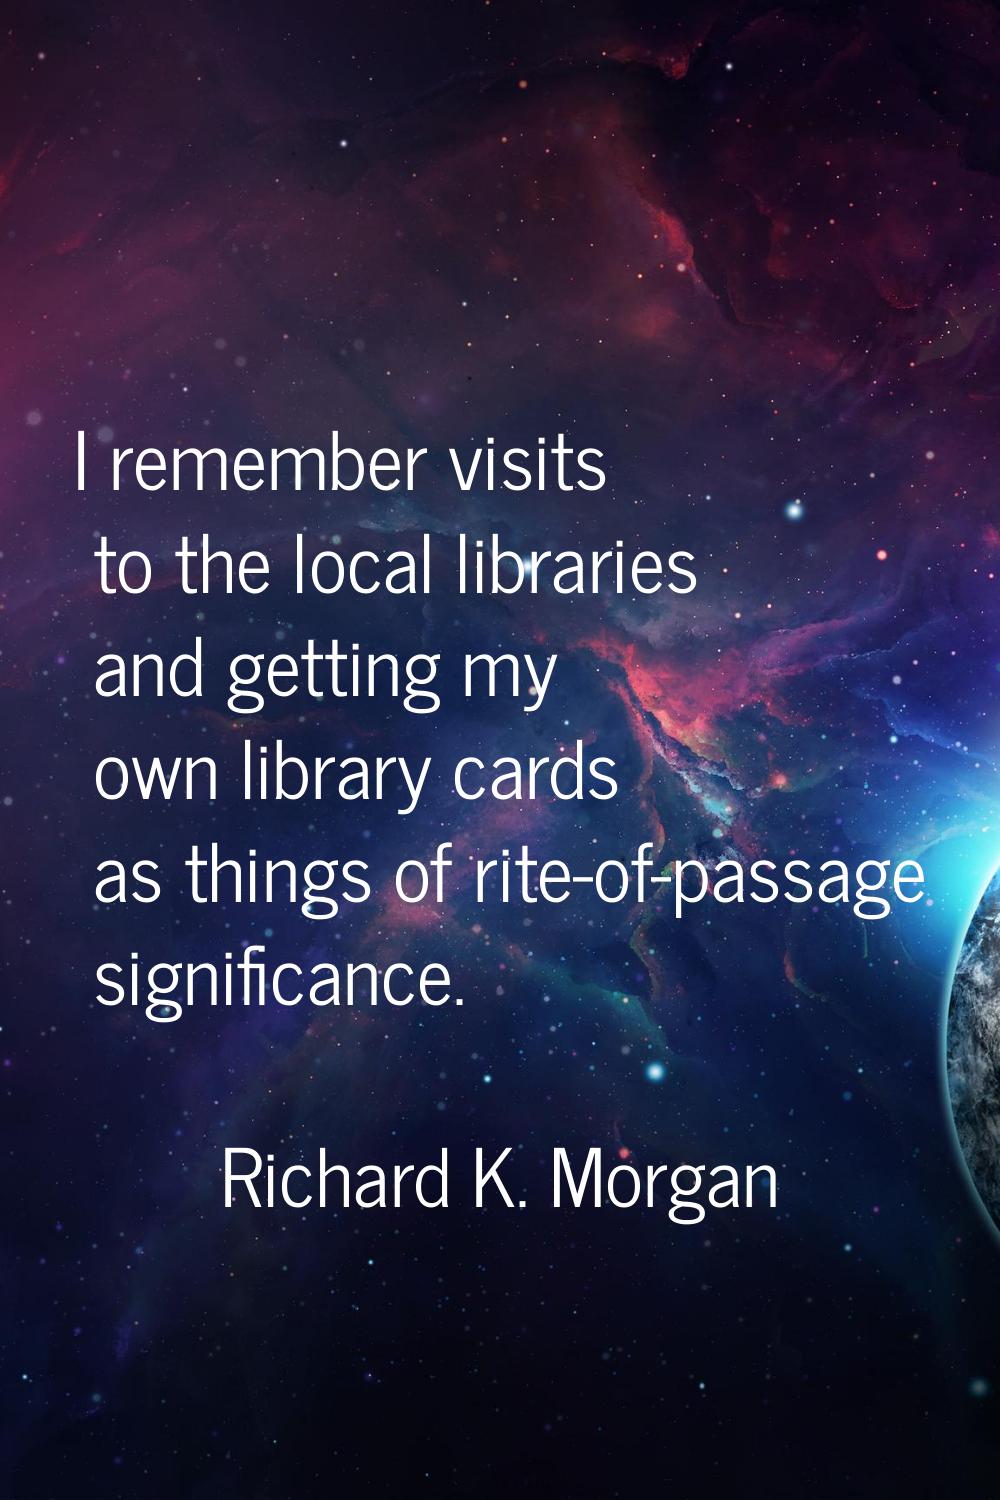 I remember visits to the local libraries and getting my own library cards as things of rite-of-pass